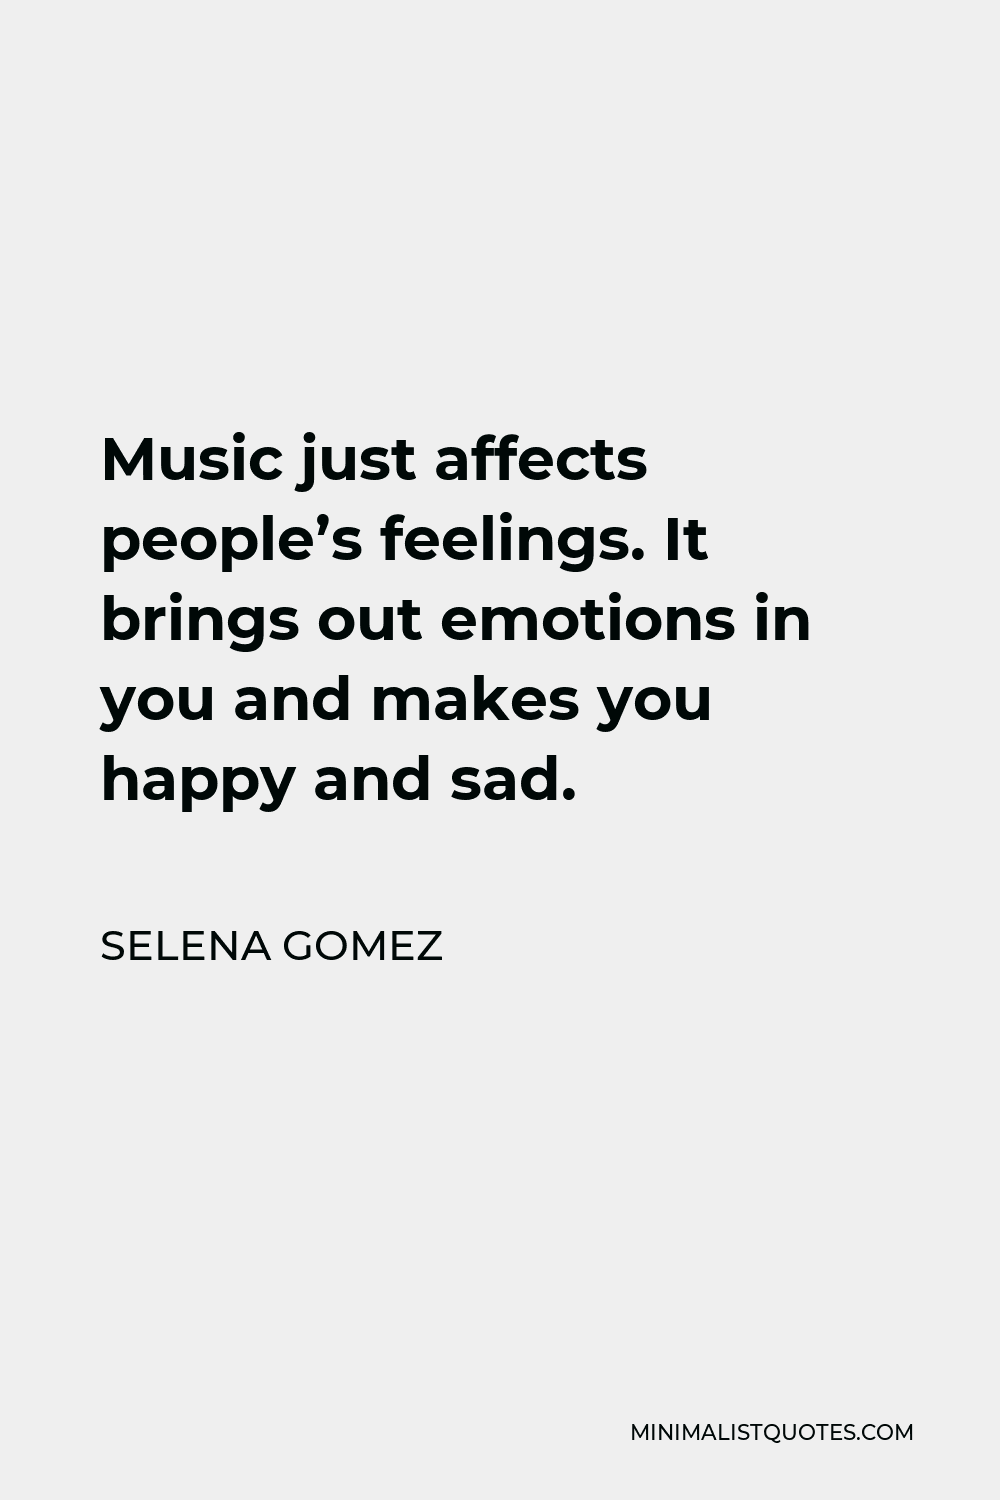 Selena Gomez Quote - Music just affects people’s feelings. It brings out emotions in you and makes you happy and sad.